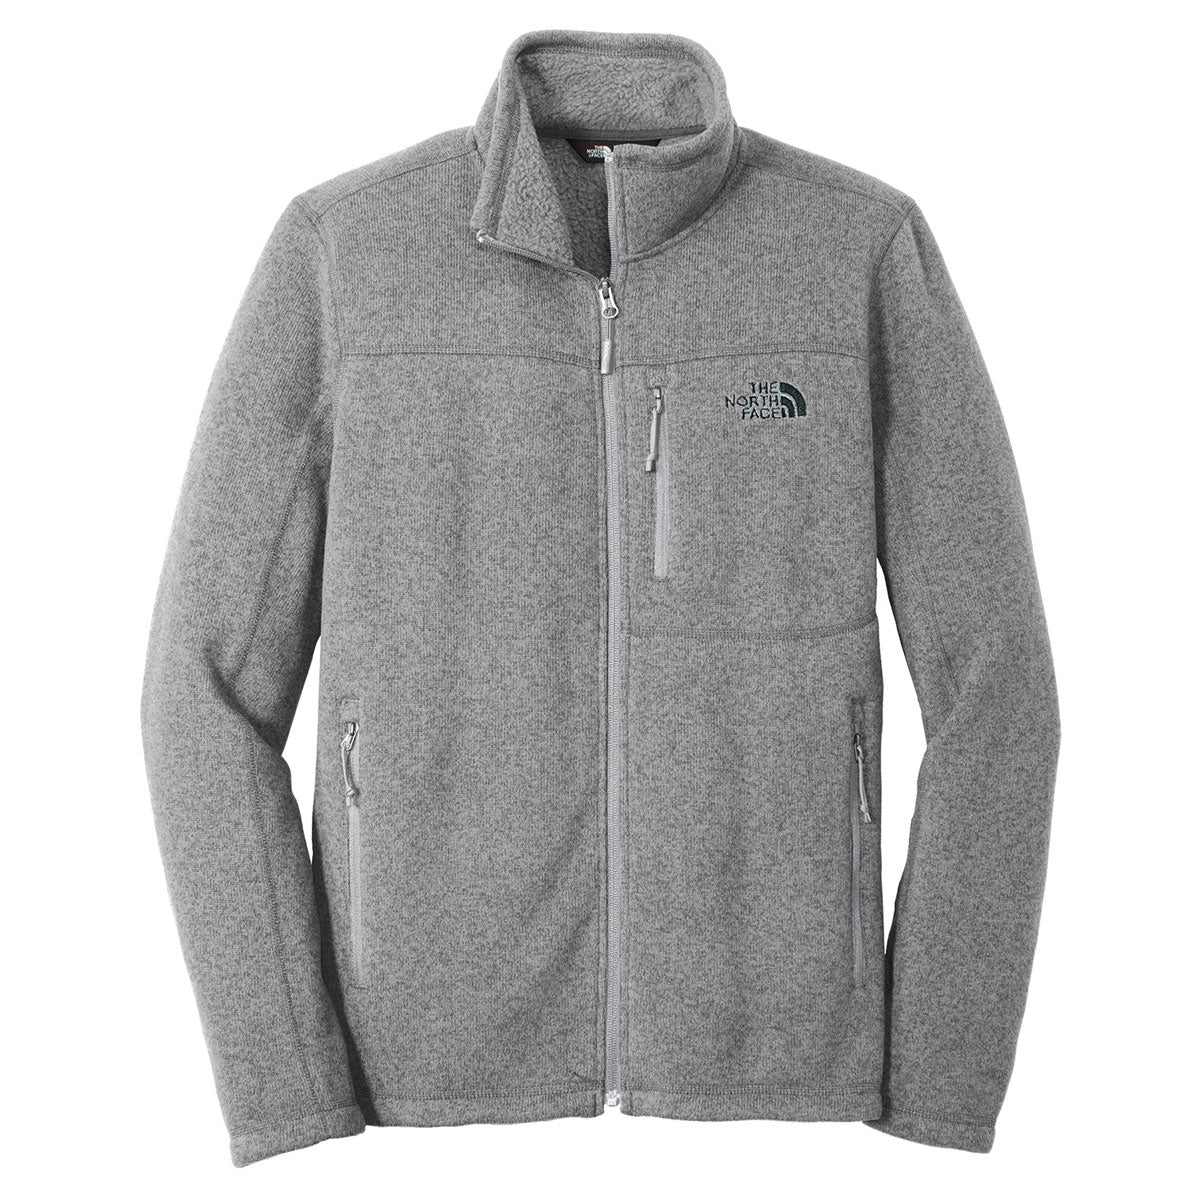 The North Face NF0A3LH8DYY Sweater Fleece Jacket - Grey Heather